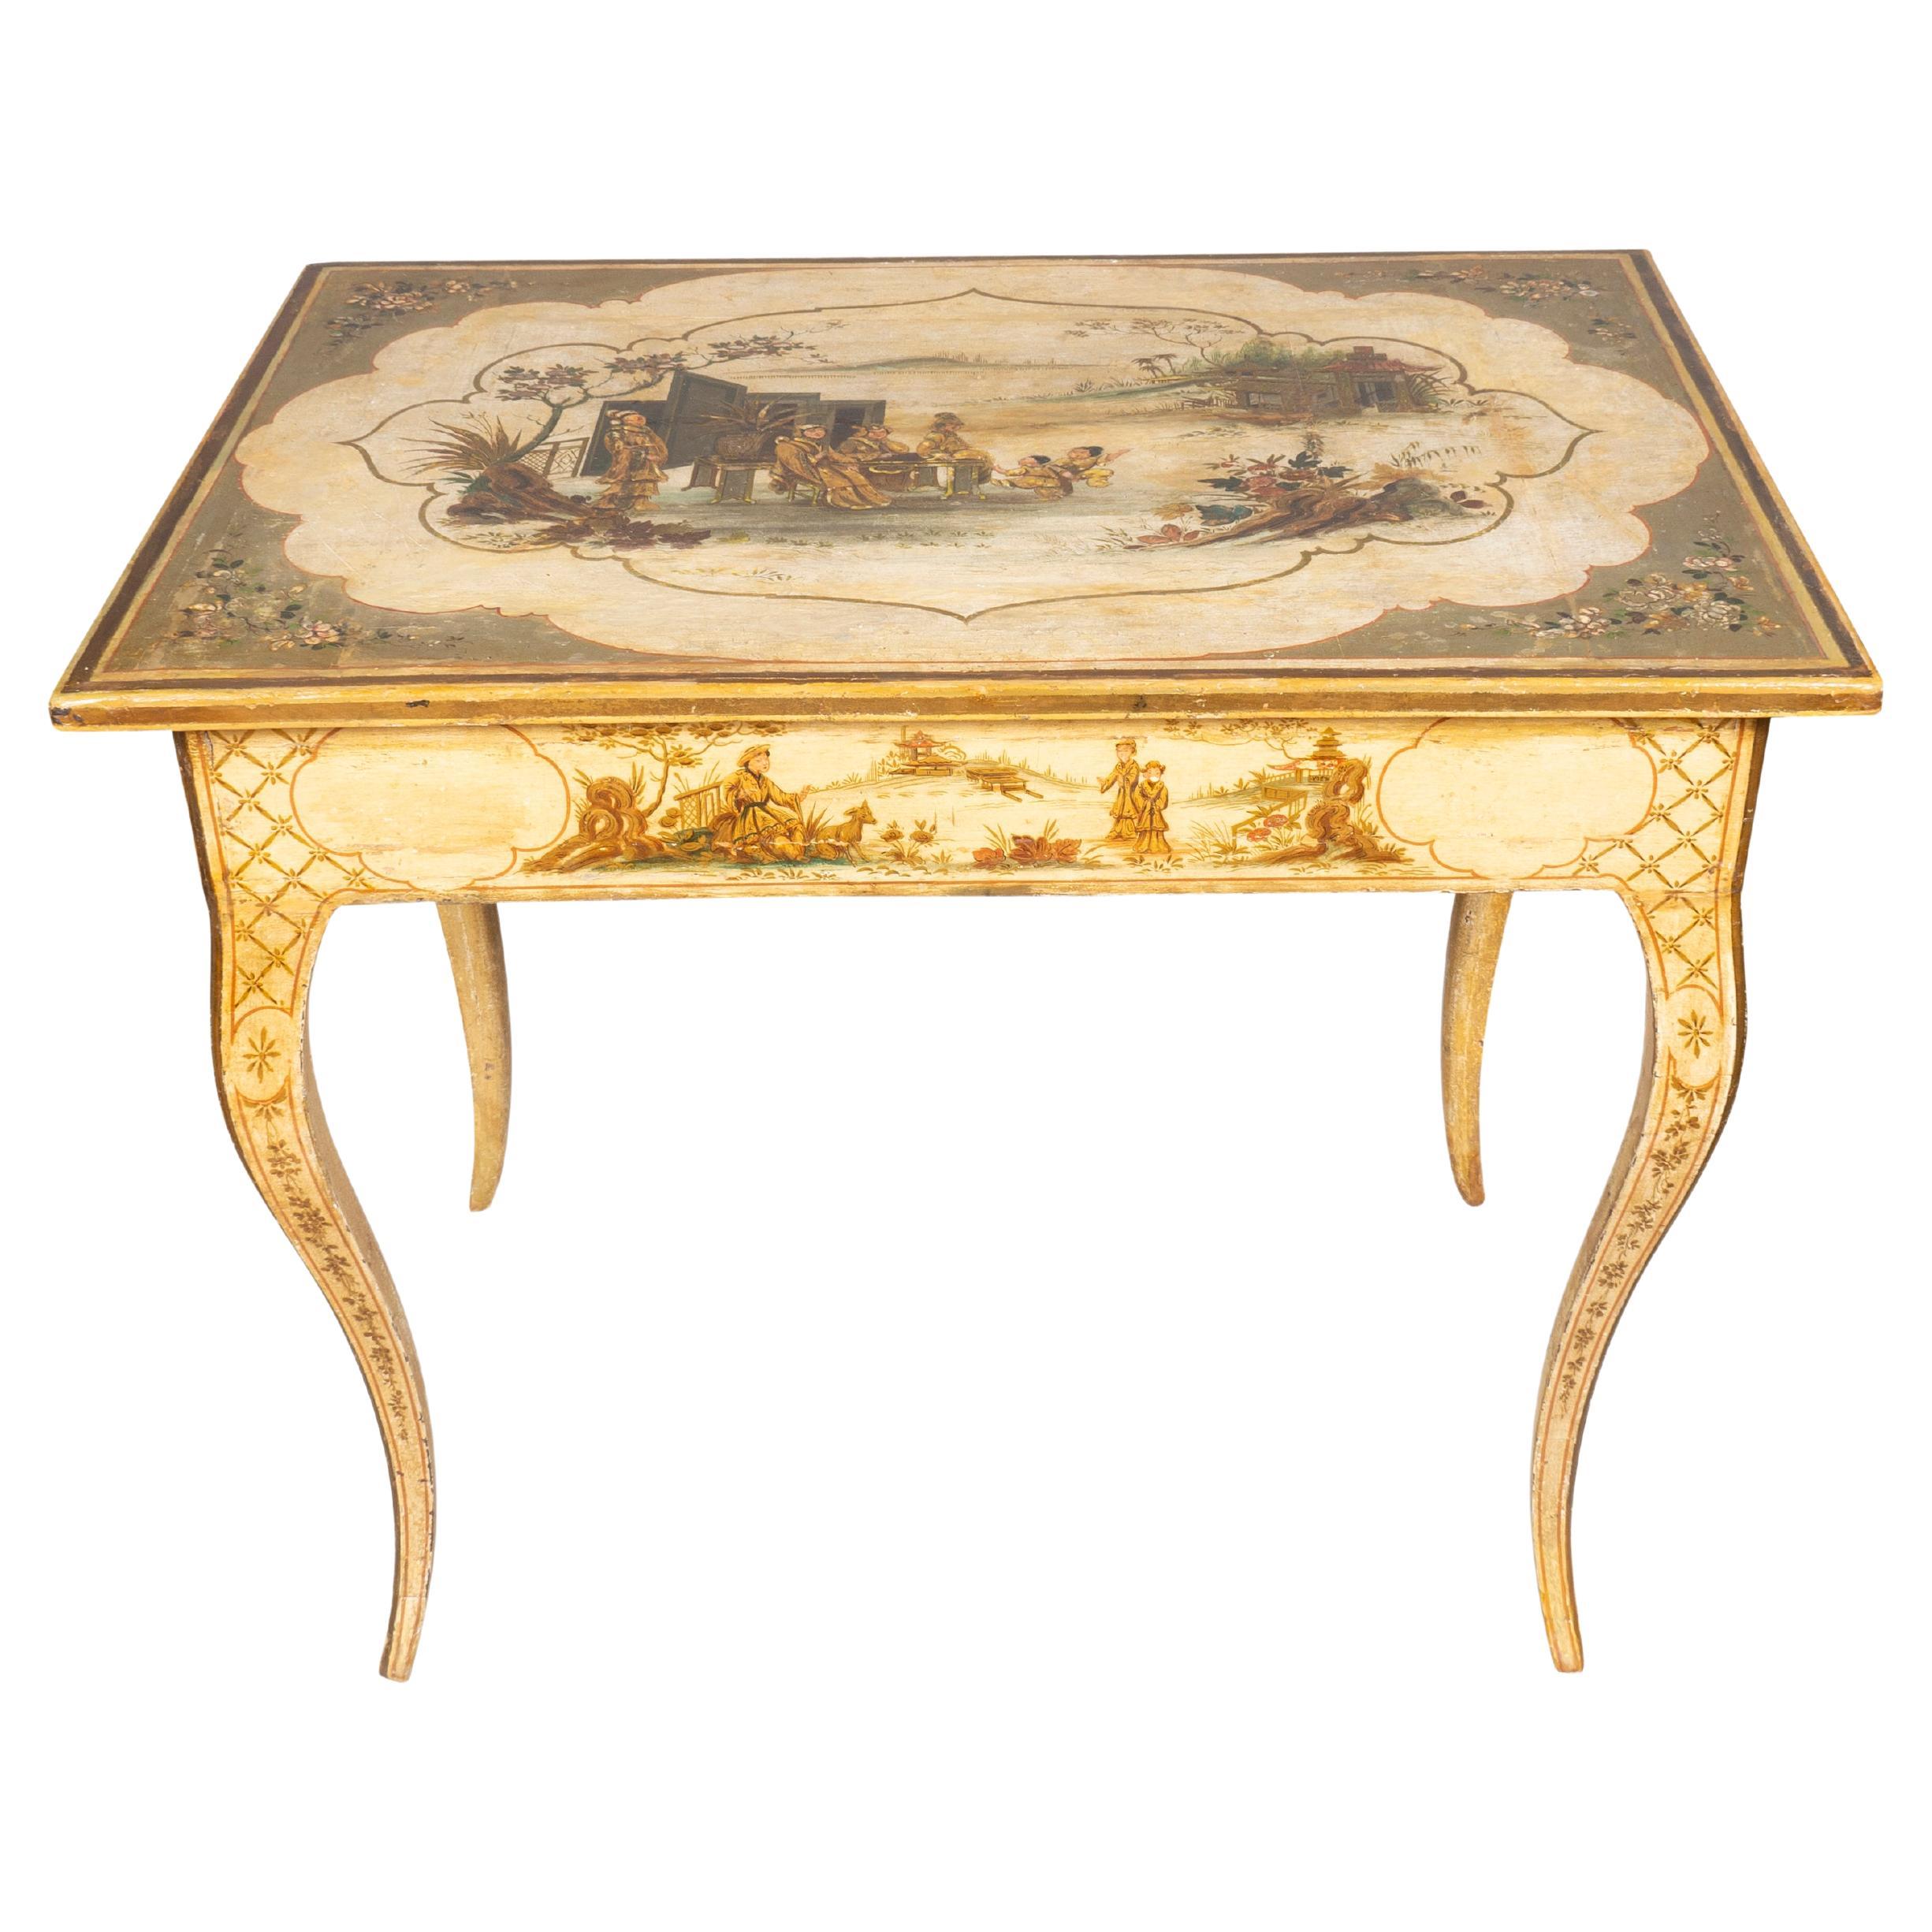 Italian Rococo Chinoiserie Decorated Table For Sale